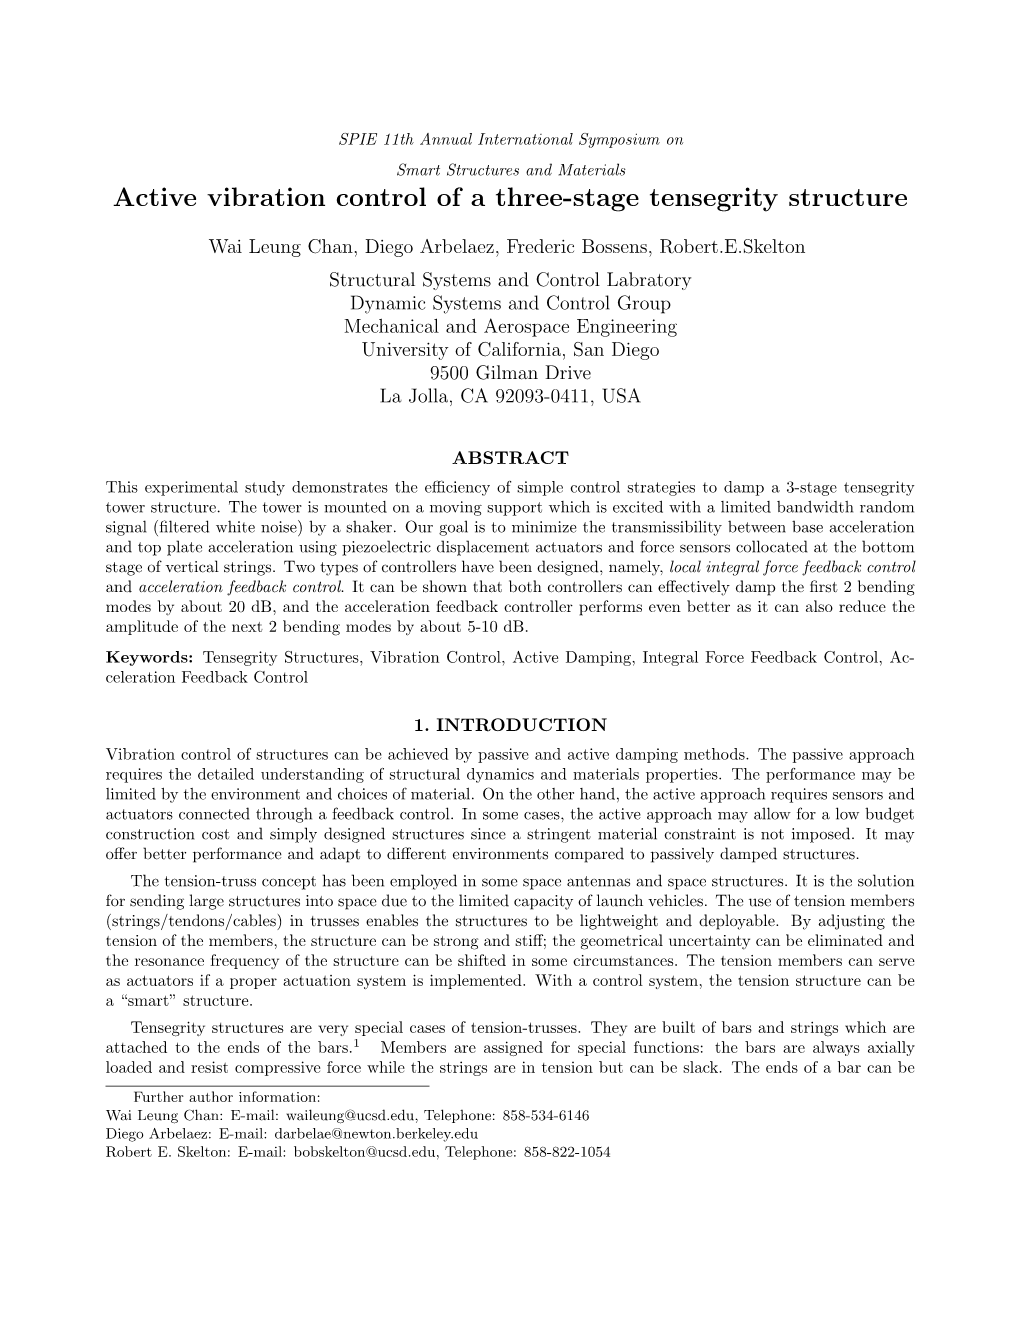 Active Vibration Control of a Three-Stage Tensegrity Structure